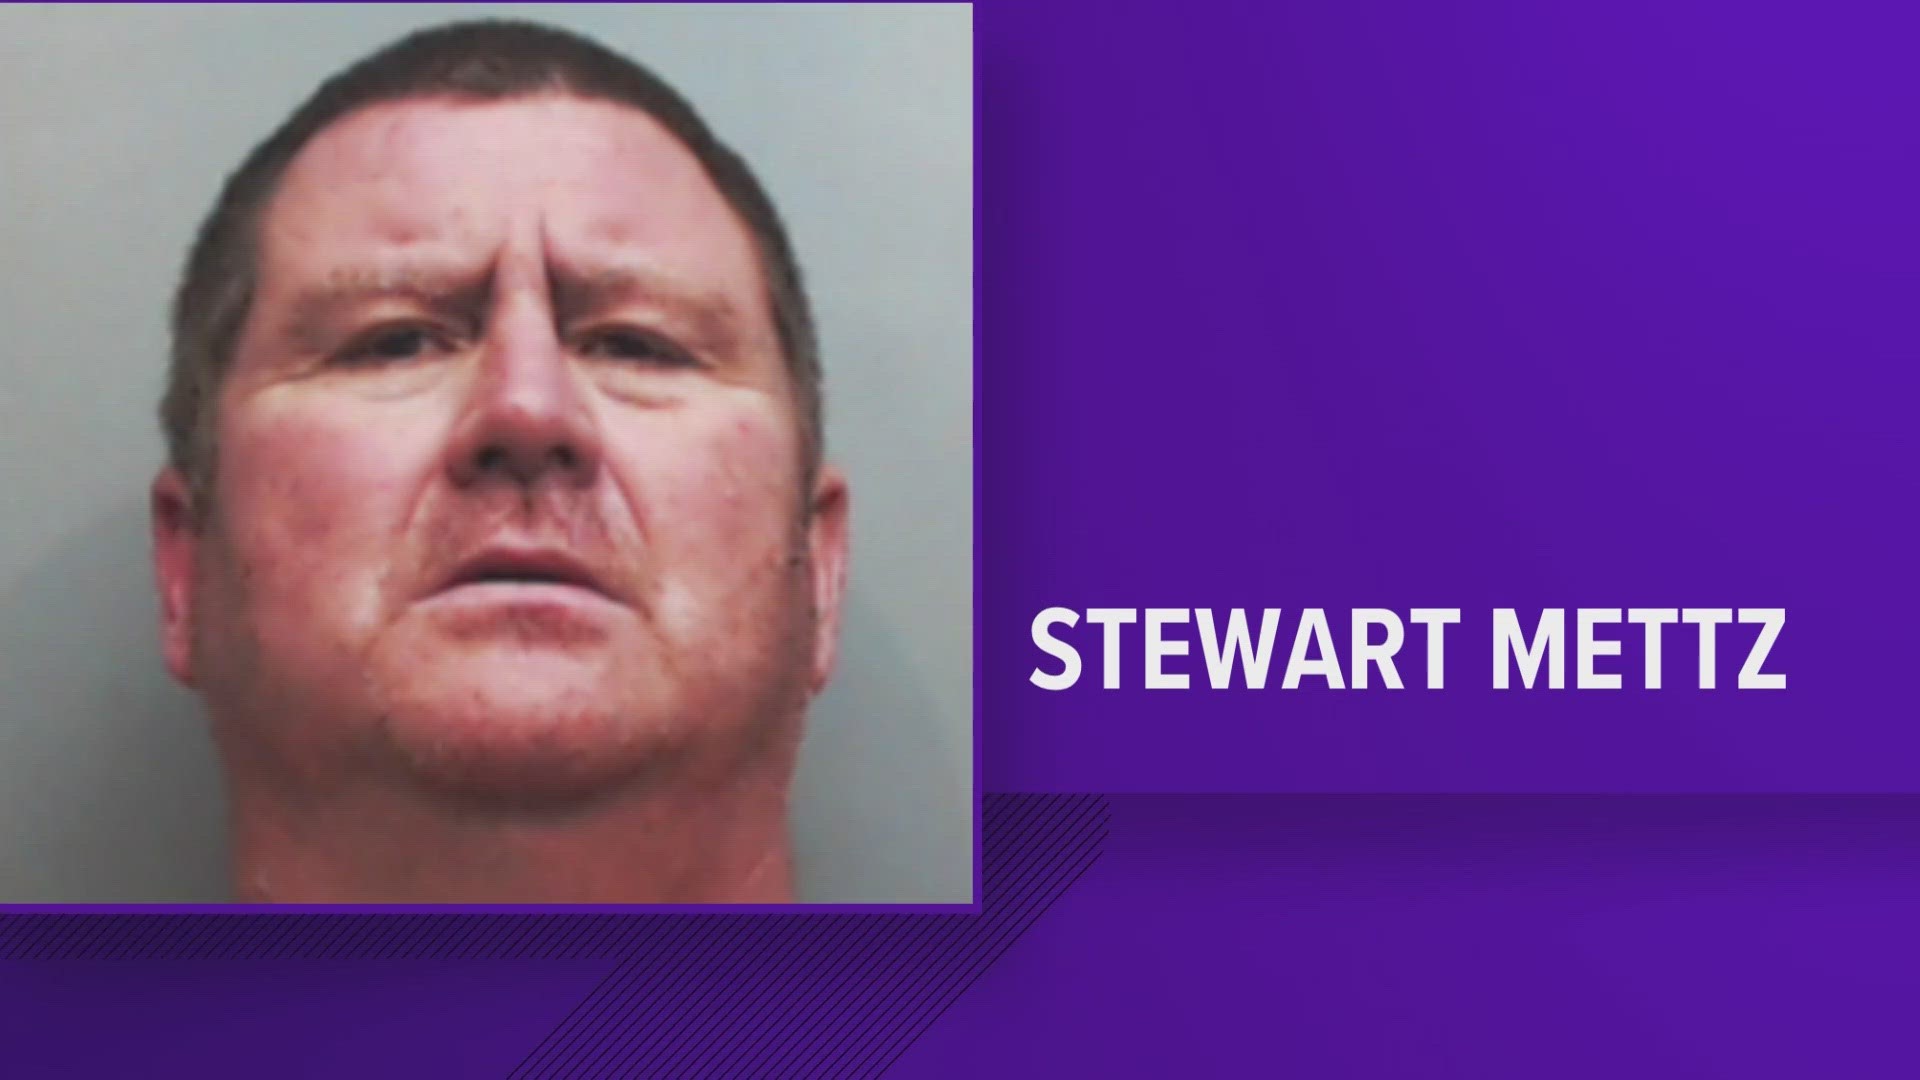 Officer Kenneth Copeland died in the line of duty on Dec. 4, 2017. More than six years later, Stewart Thomas Mettz has been sentenced to life for capital murder.